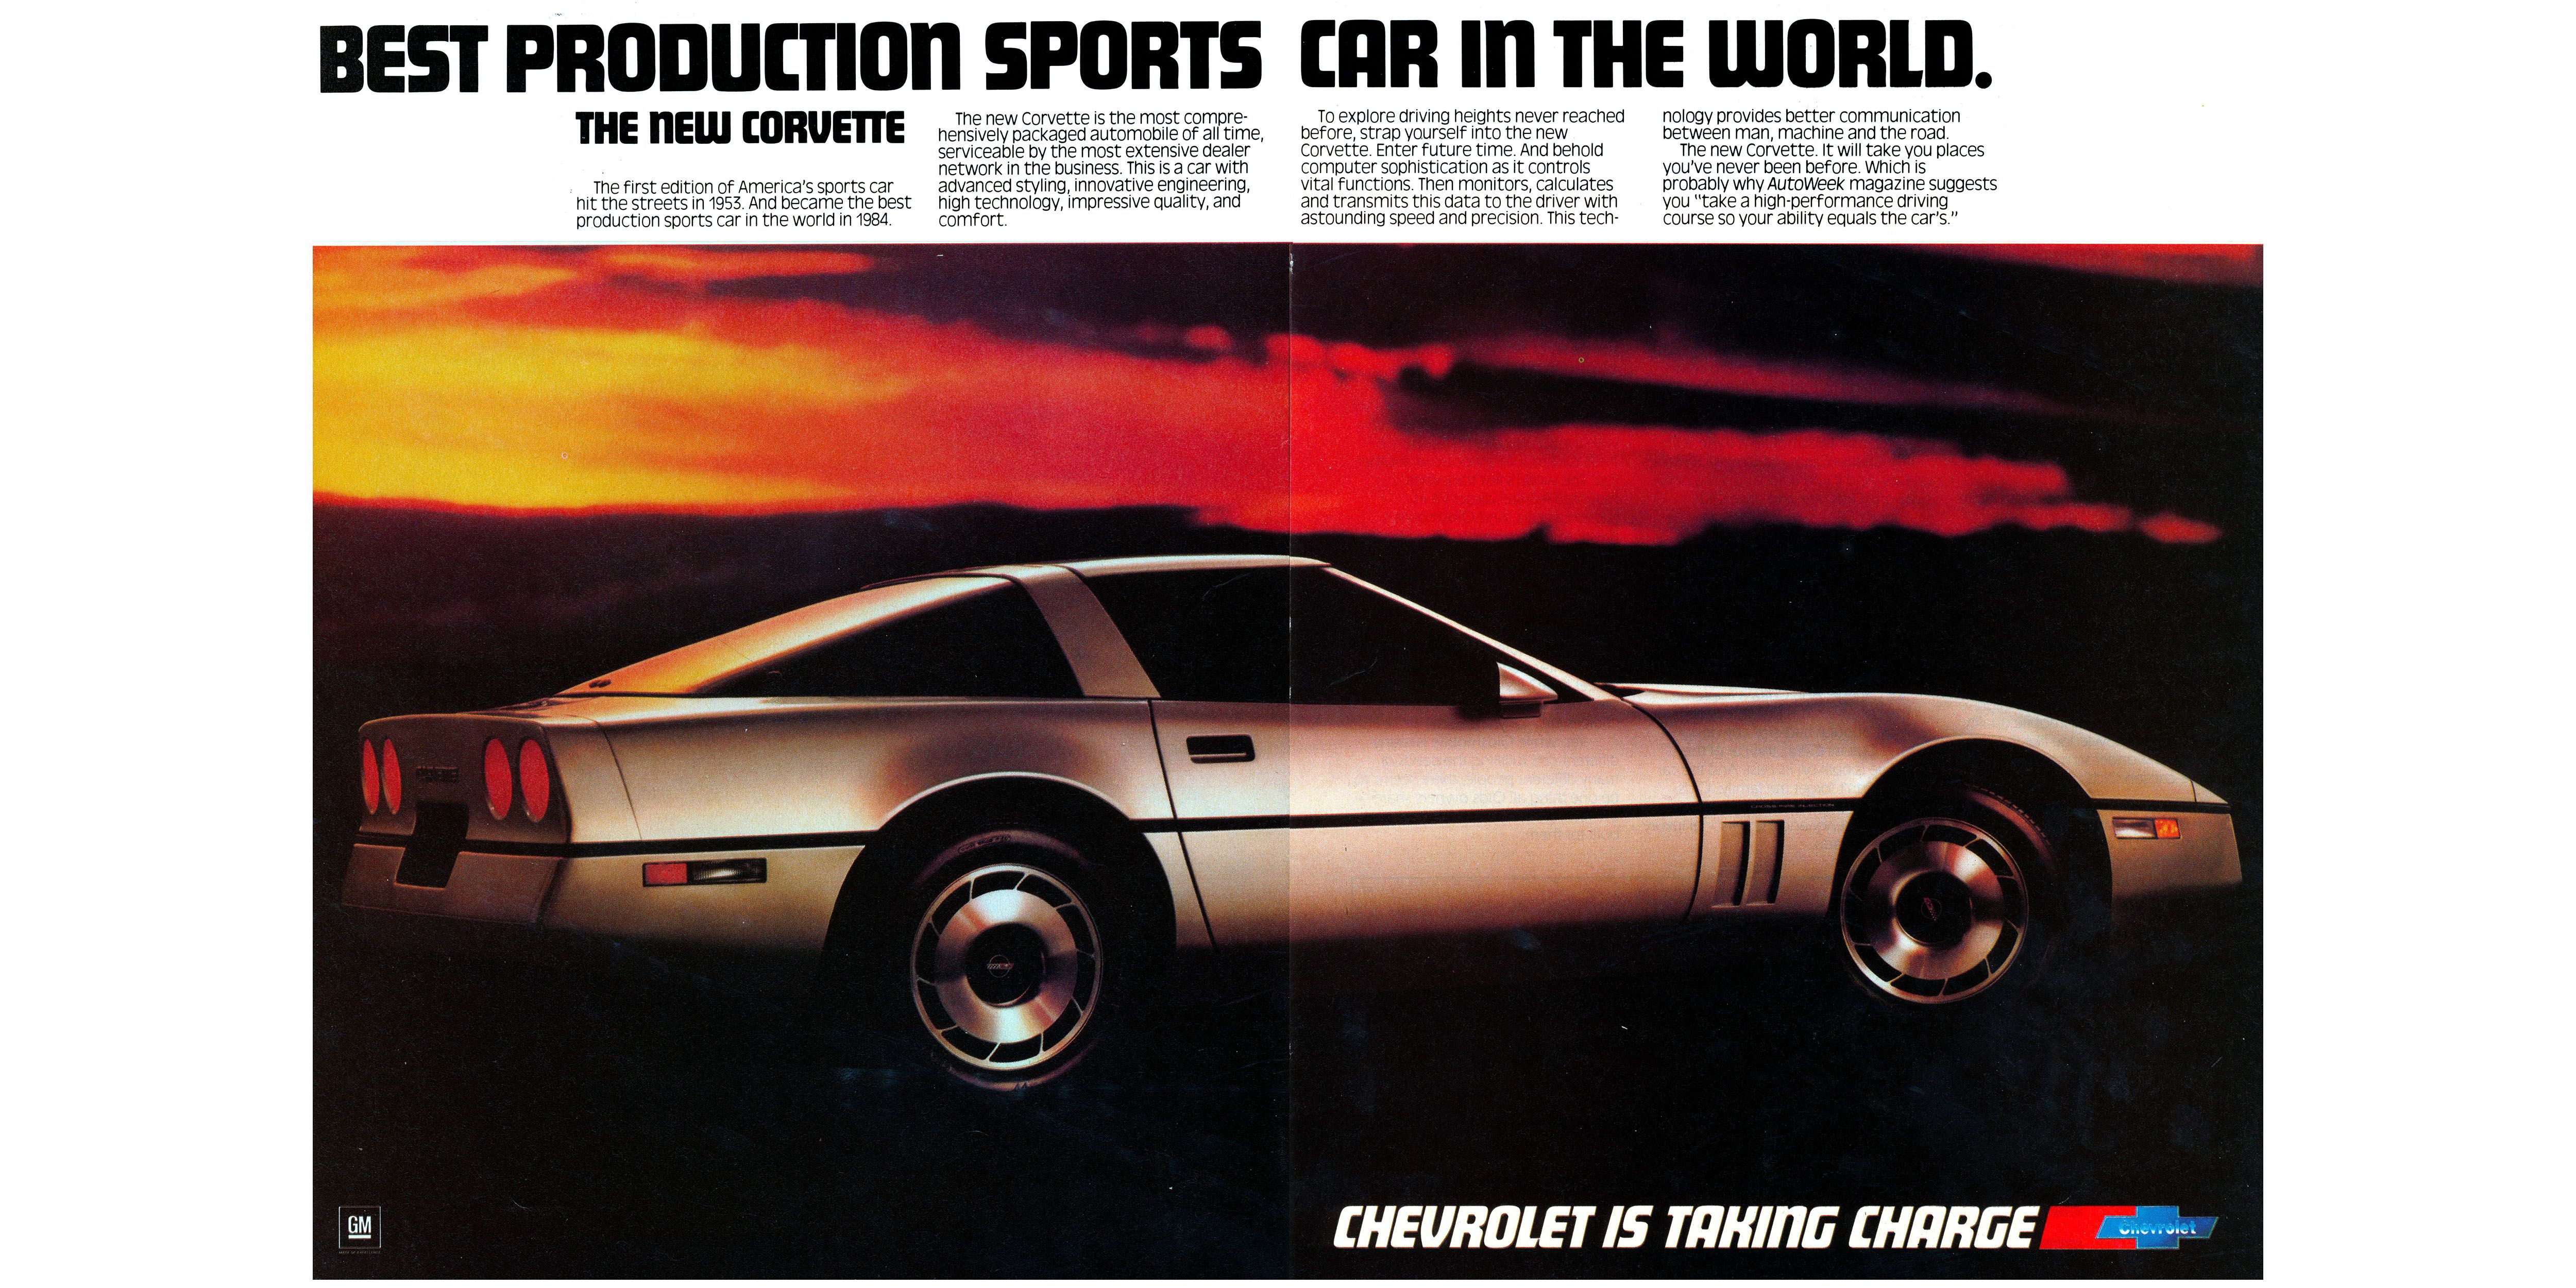 1984 Corvette a Year Late, Still Best Sports Car In the World